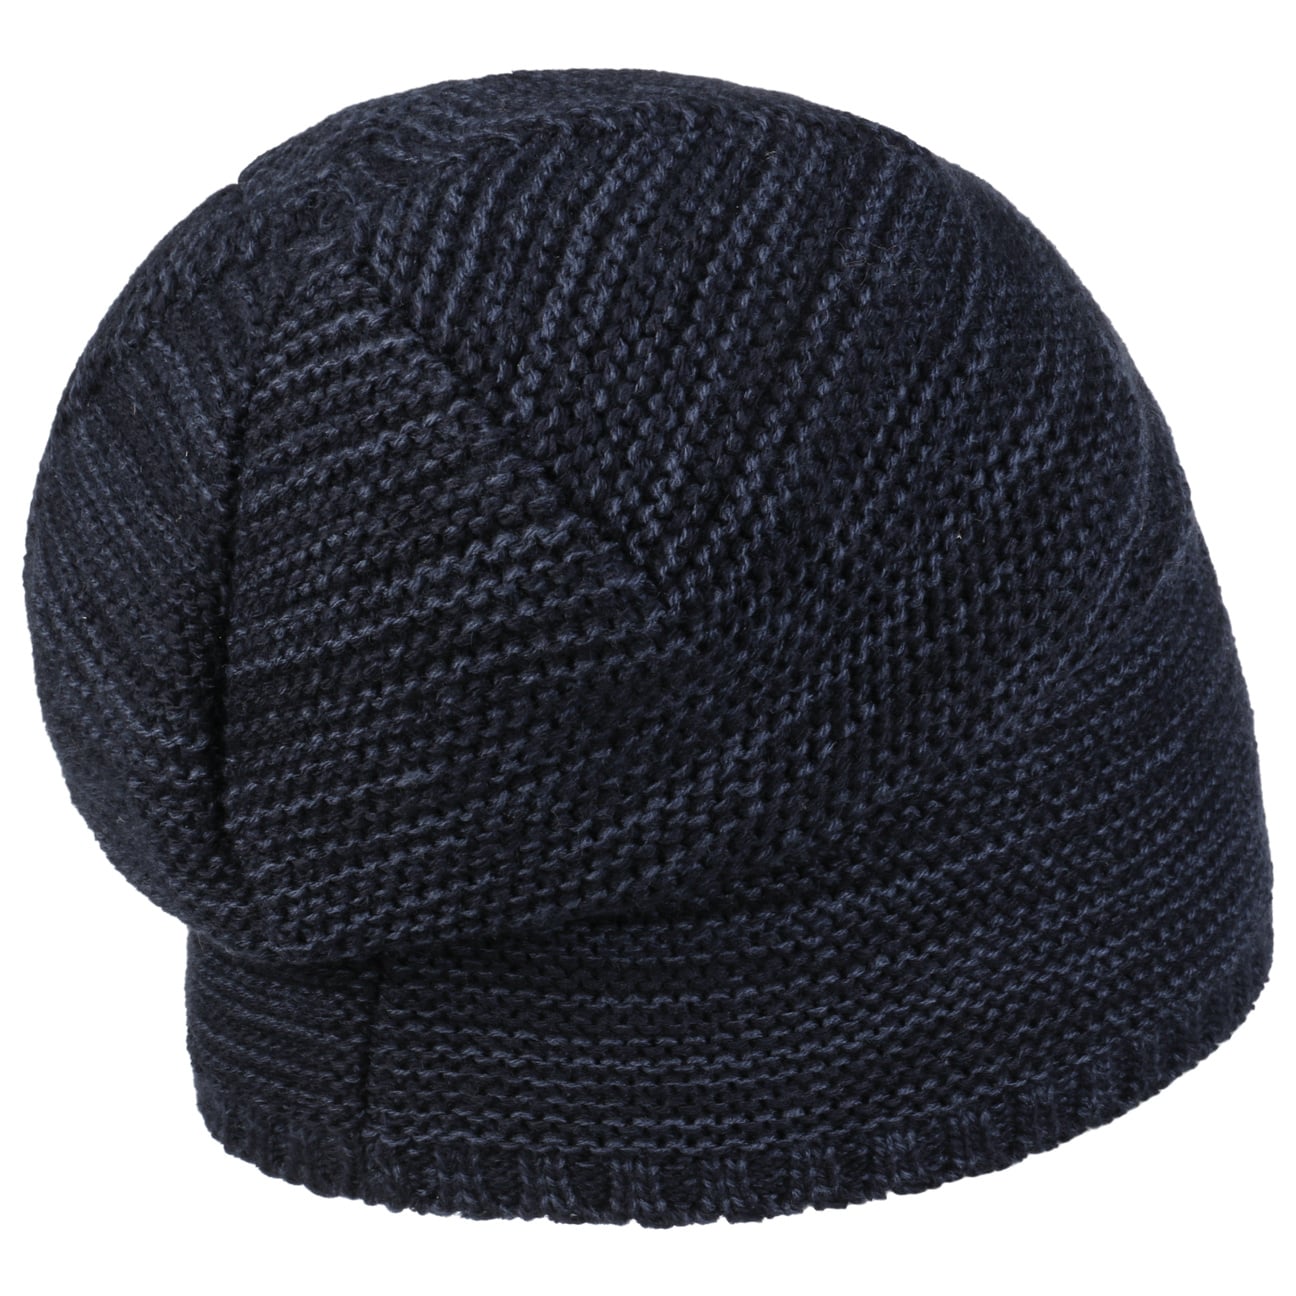 34,99 Beanie - Chillouts Keith by €